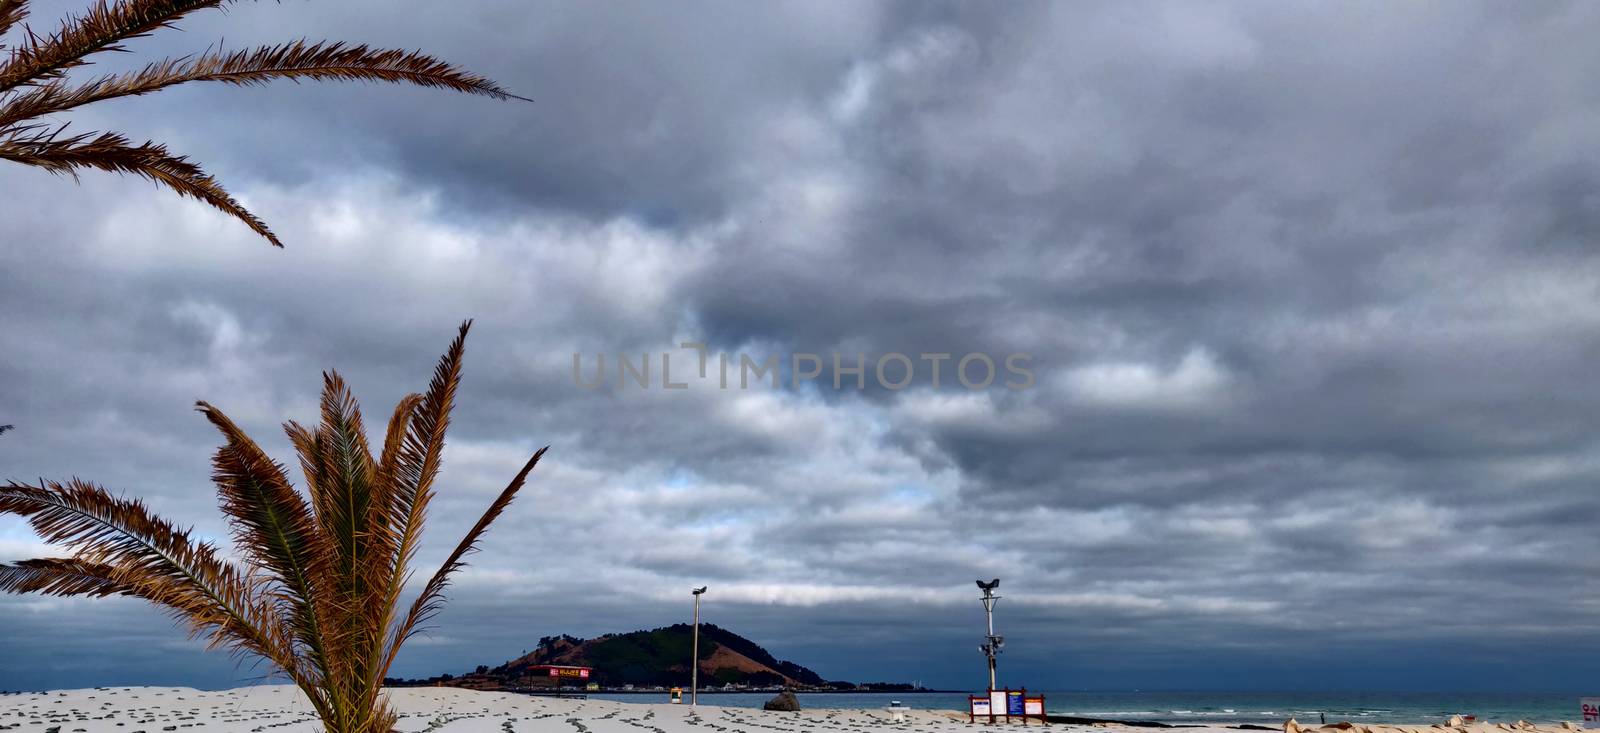 Cloudy sky with spike plant on beach in foreground in Jeju Island, South Korea